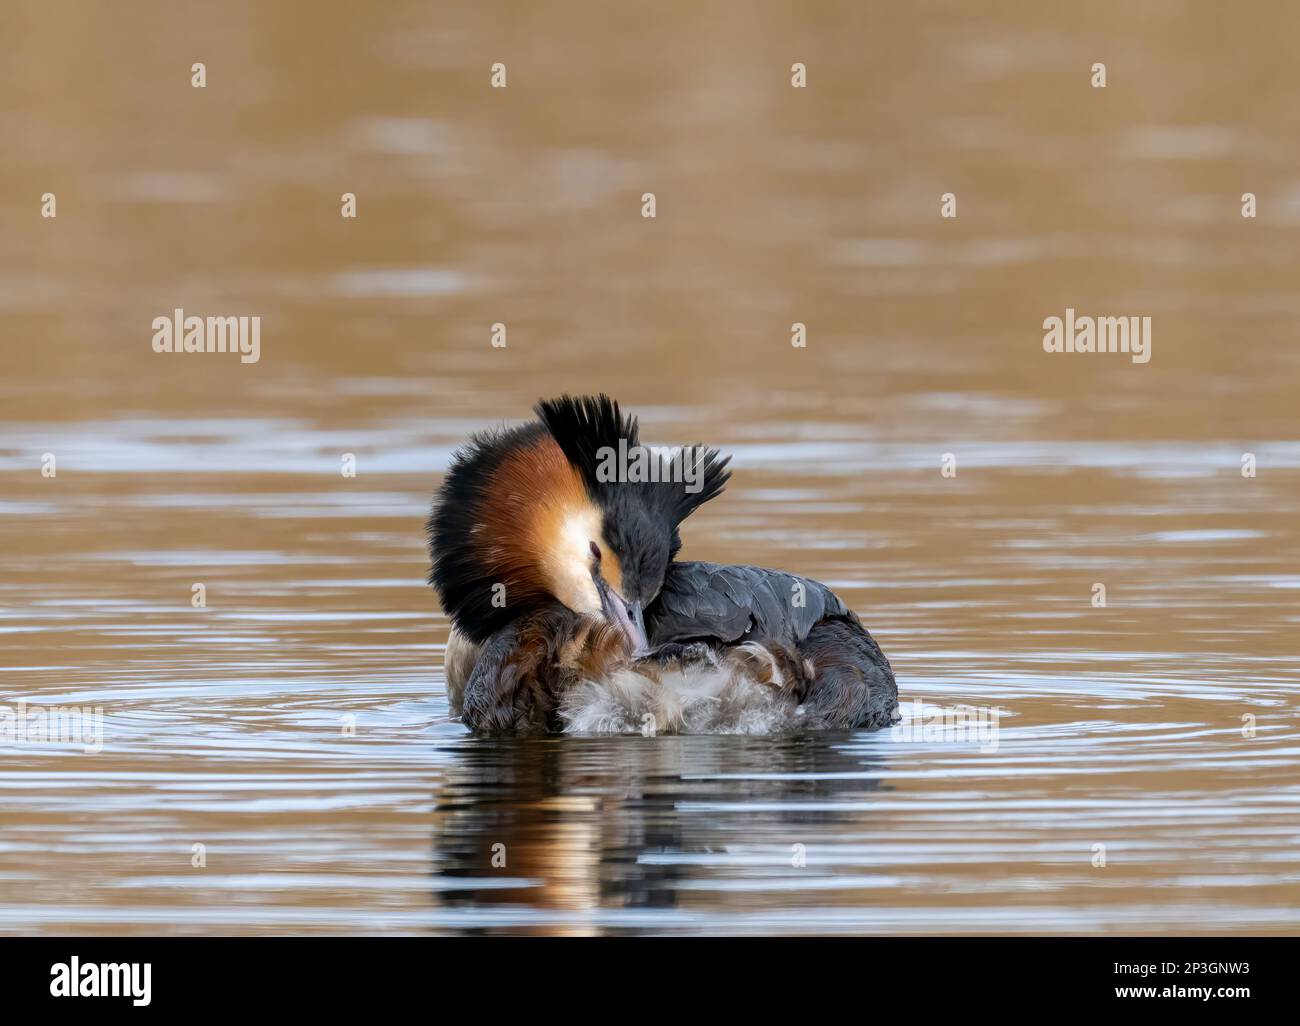 An elegant Great Crested Grebe, (Podiceps cristatus), swims on a lake in front of a reed bed in Fleetwood, Blackpool, Lancashire, UK Stock Photo